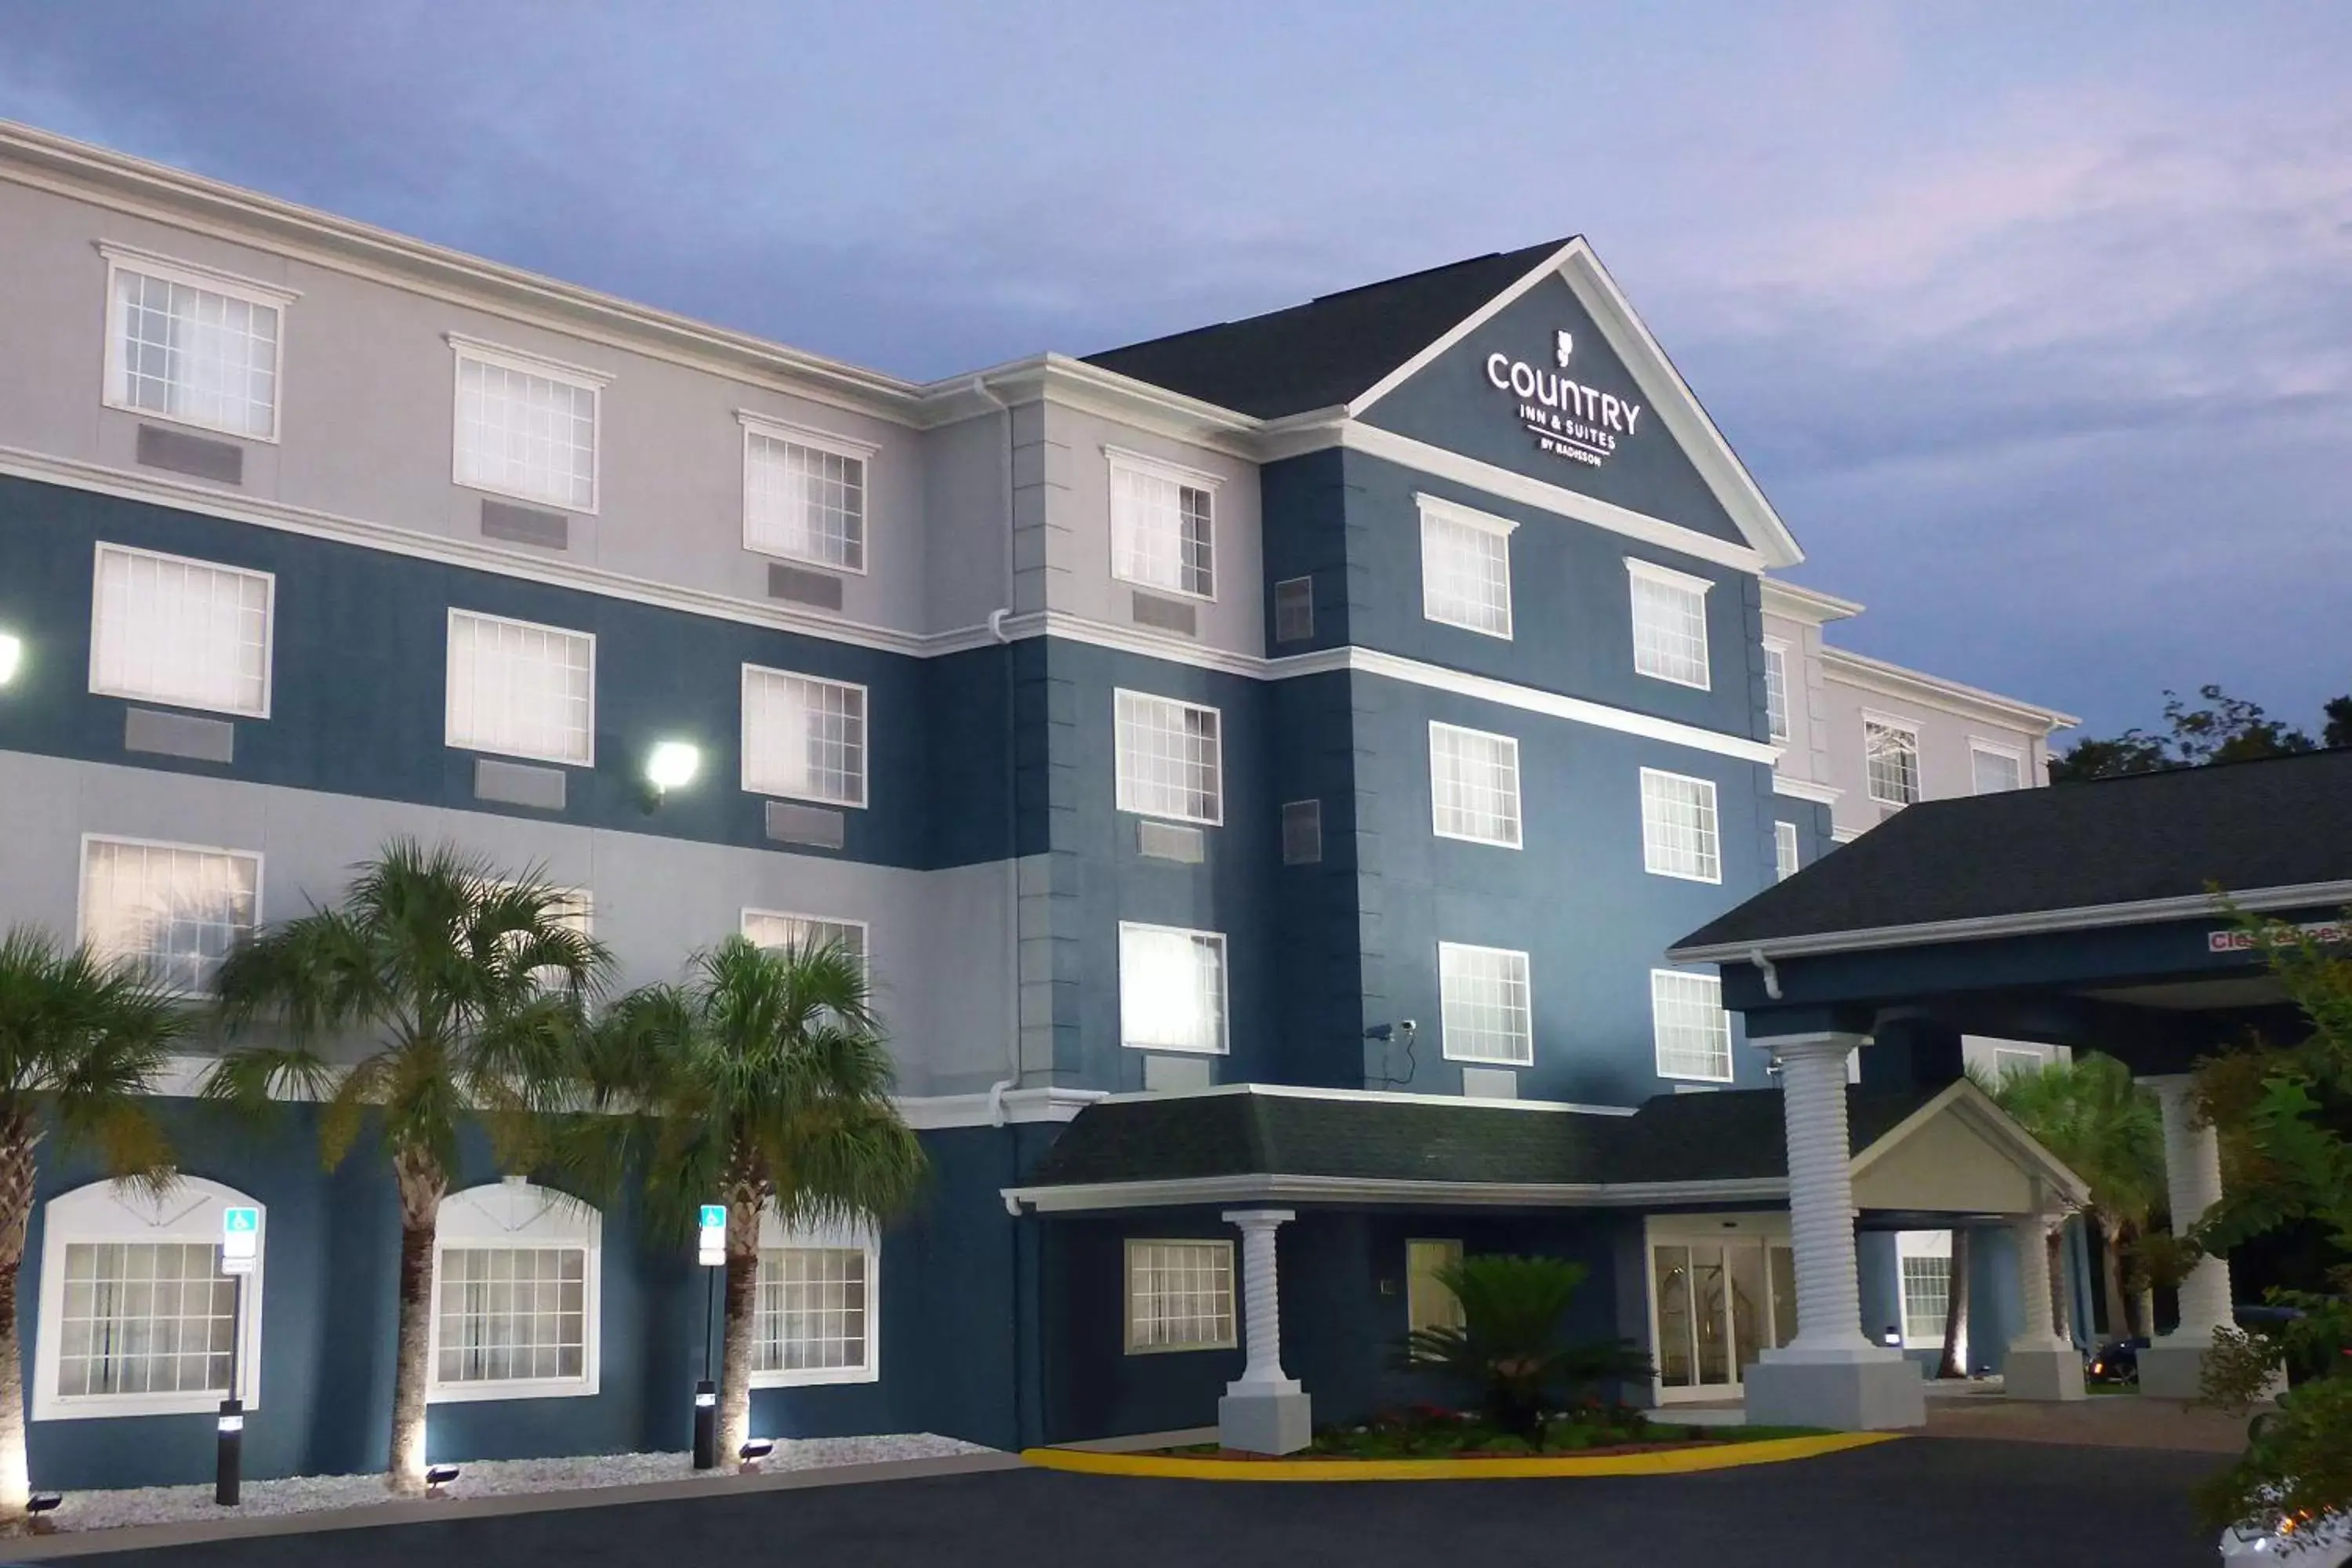 Property Building in Country Inn & Suites by Radisson, Pensacola West, FL